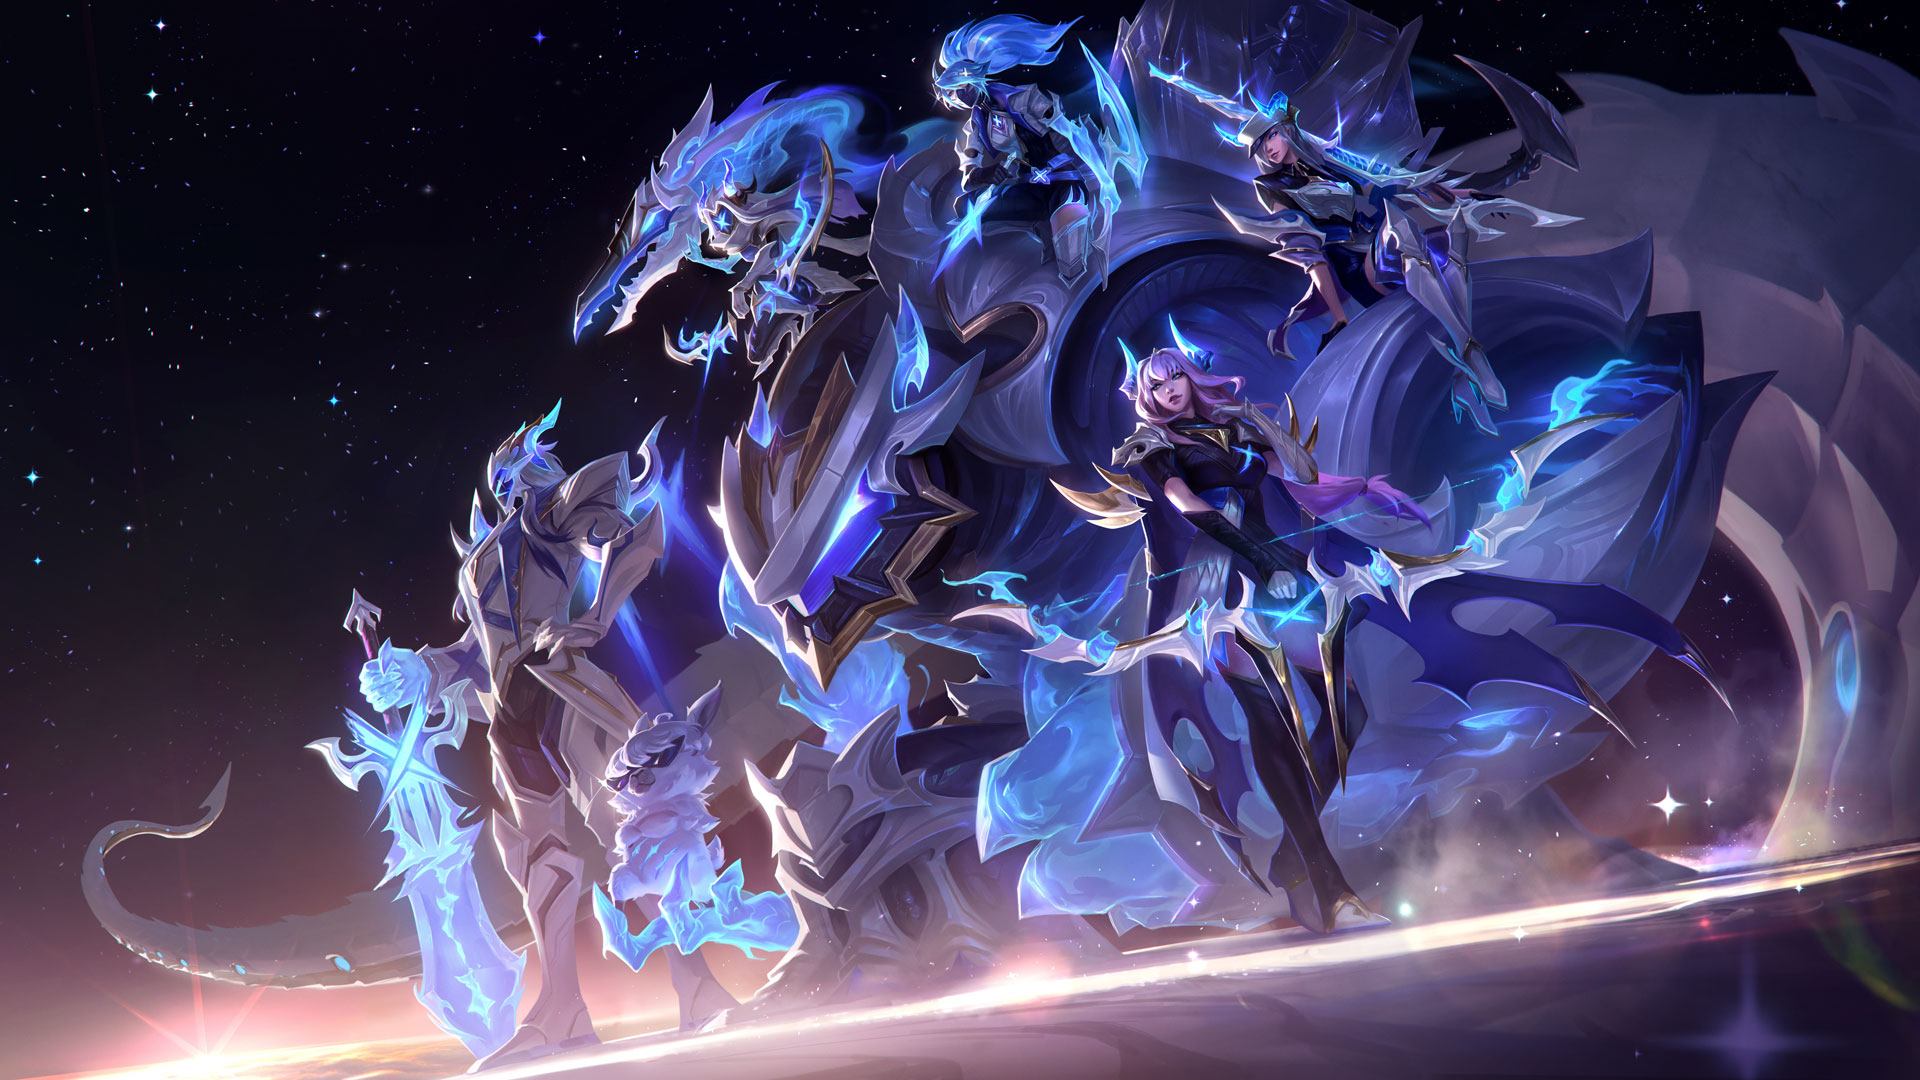 League of Legends patch notes – 13.10 update buffs ADCs, at a cost